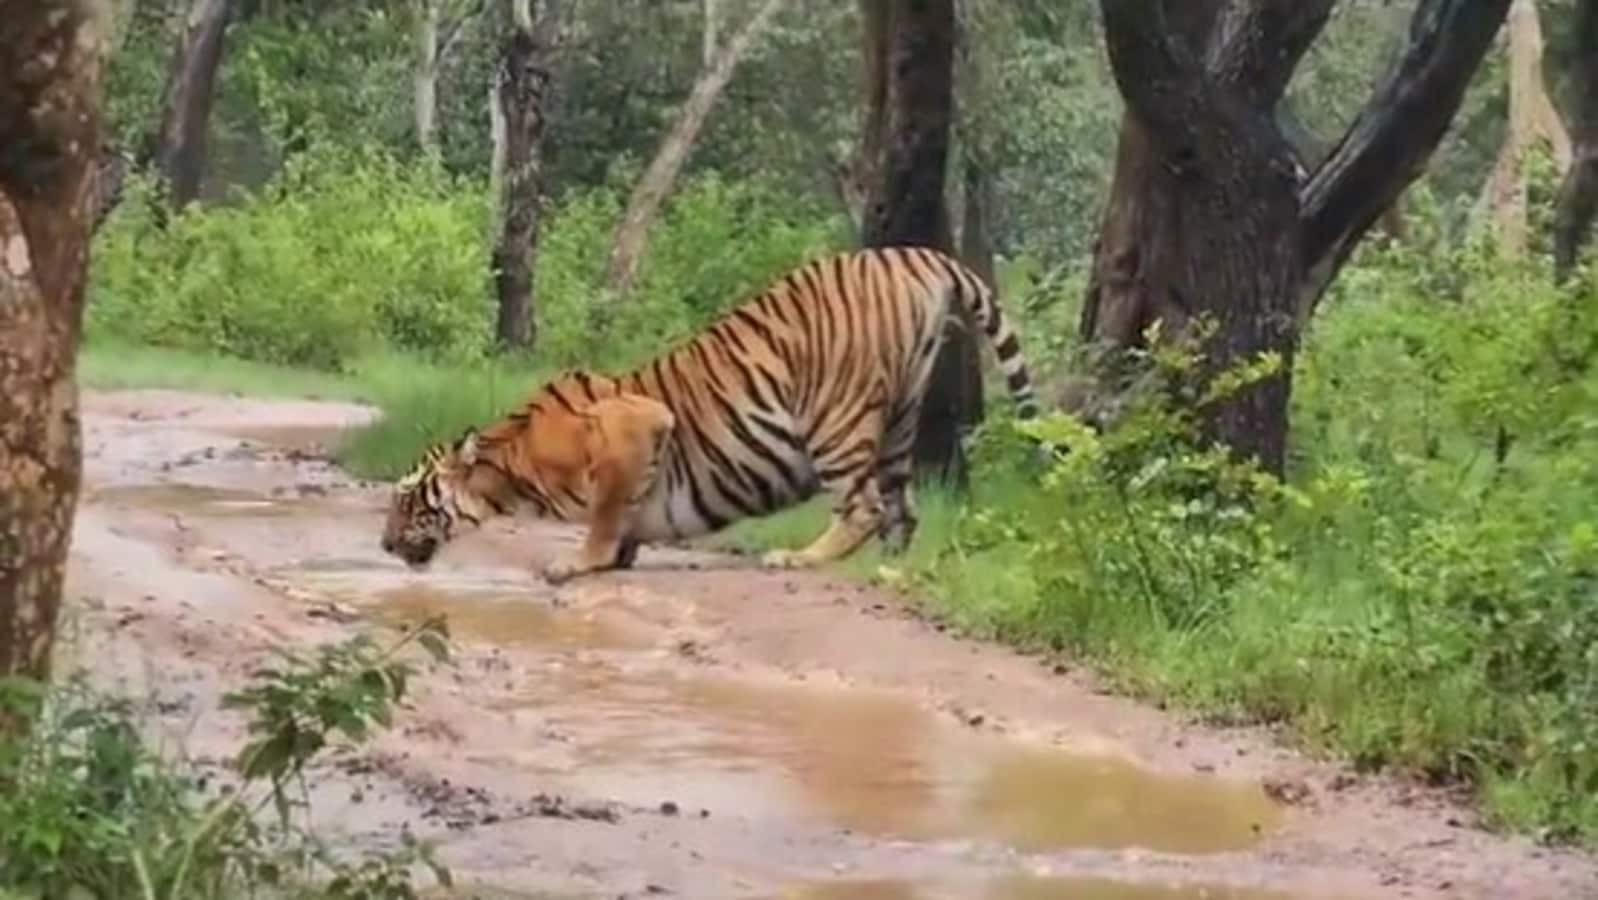 Tiger drinks water from puddle on road amid rainfall at Bandipur National Park